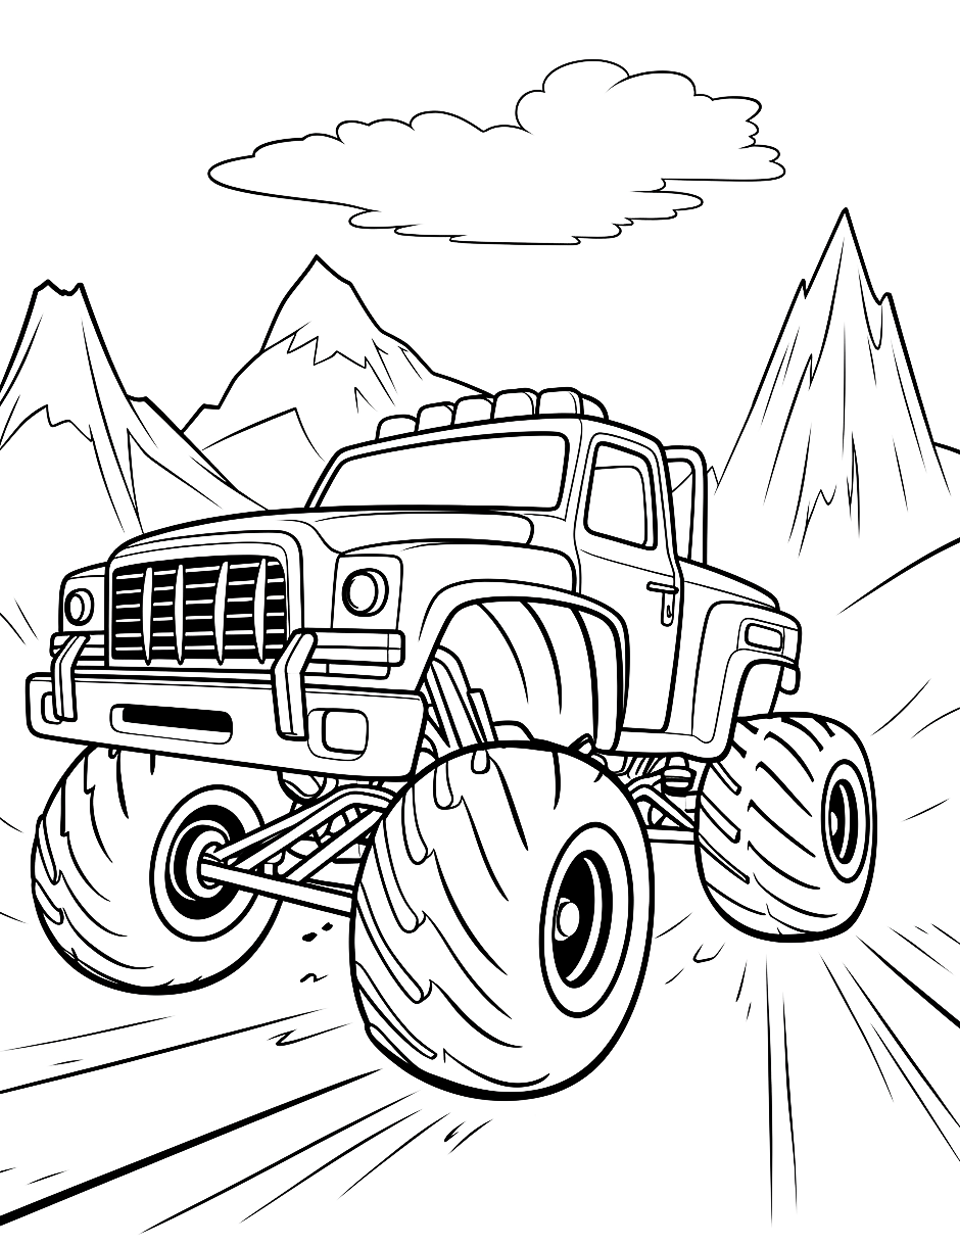 Monster Truck In the Mountains Coloring Page - A monster truck driving in the wilderness with mountains in the background.